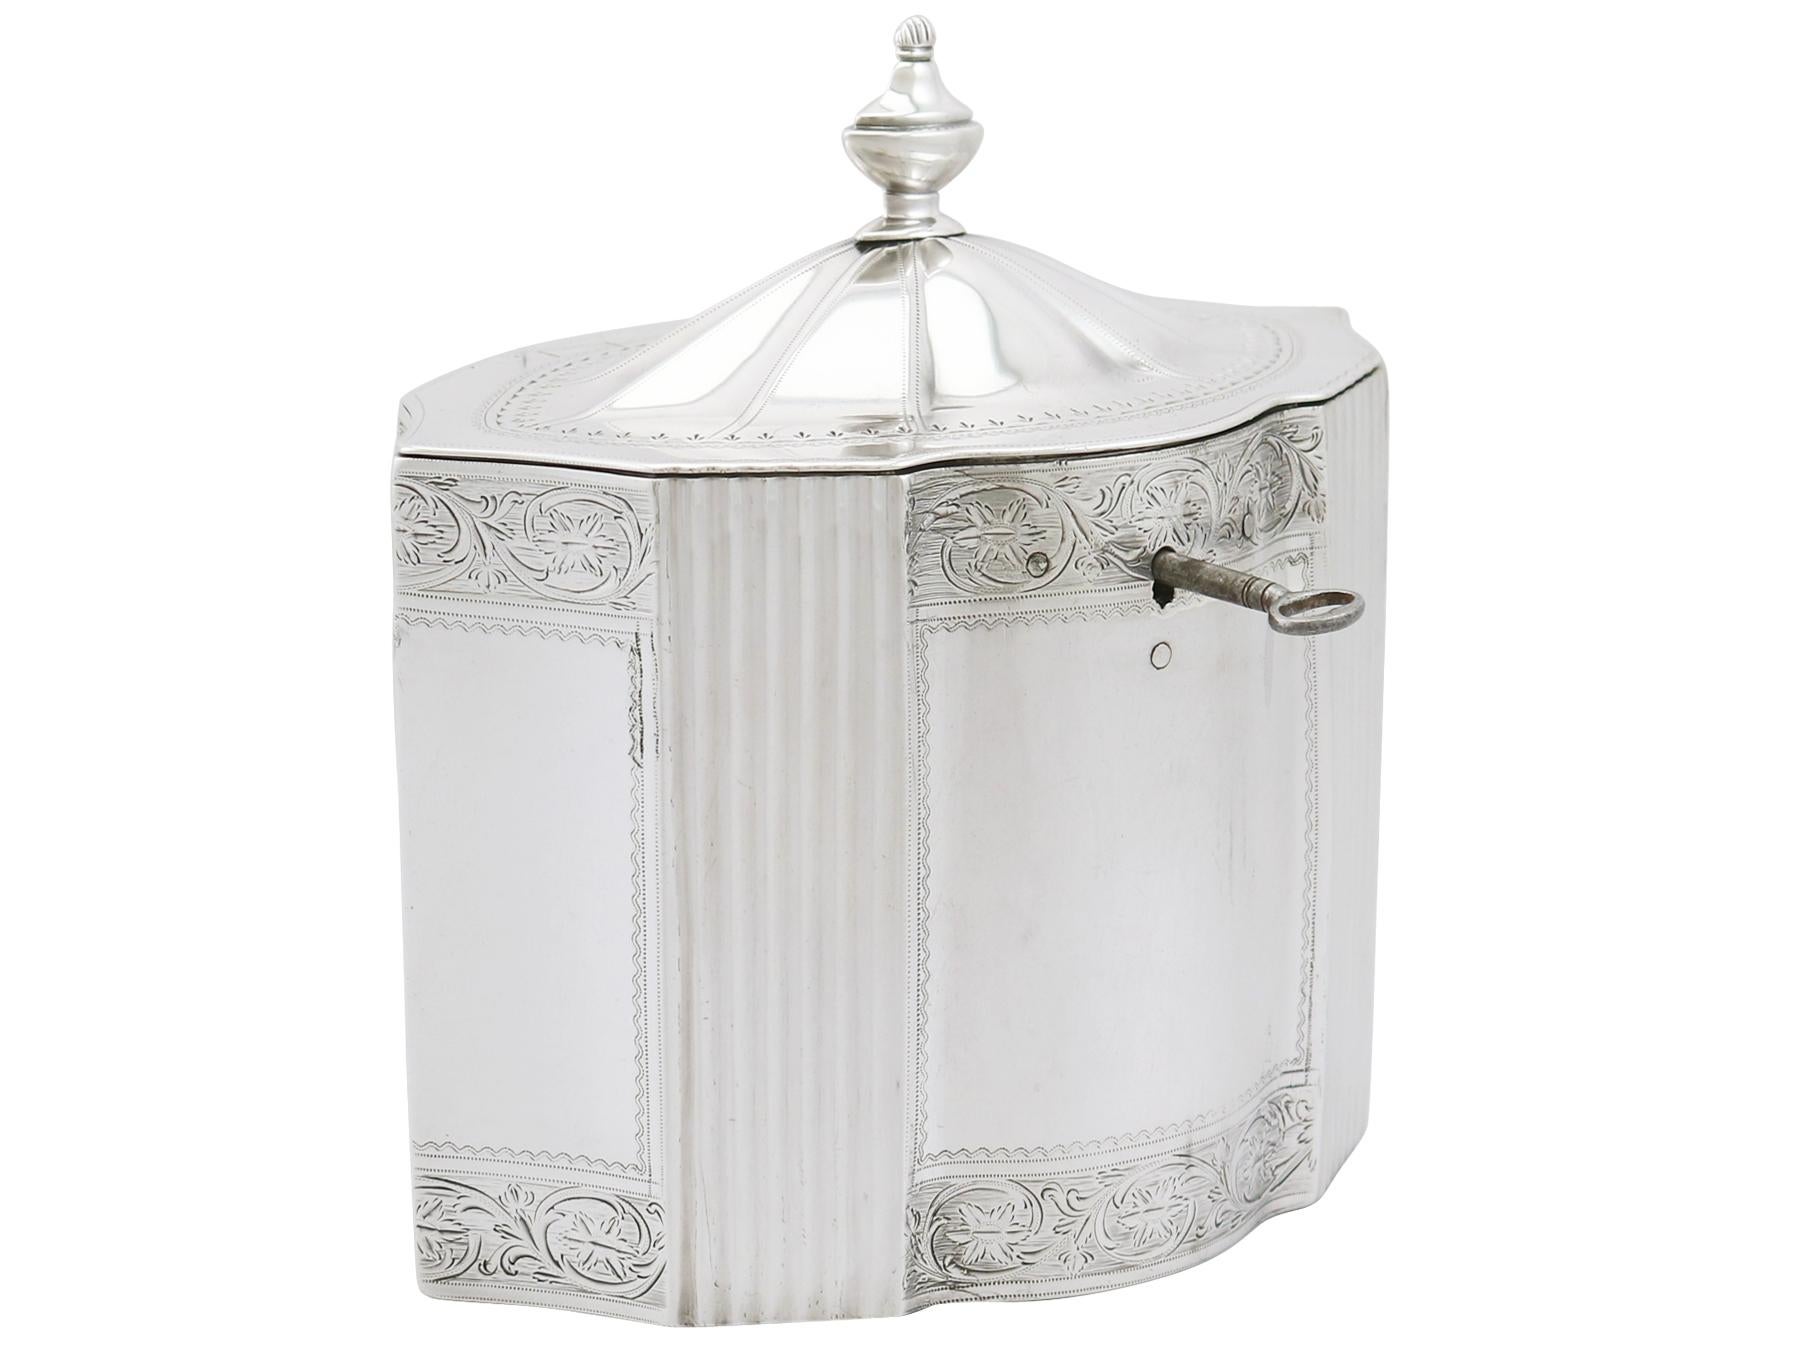 George III 18th Century Sterling Silver Locking Tea Caddy For Sale